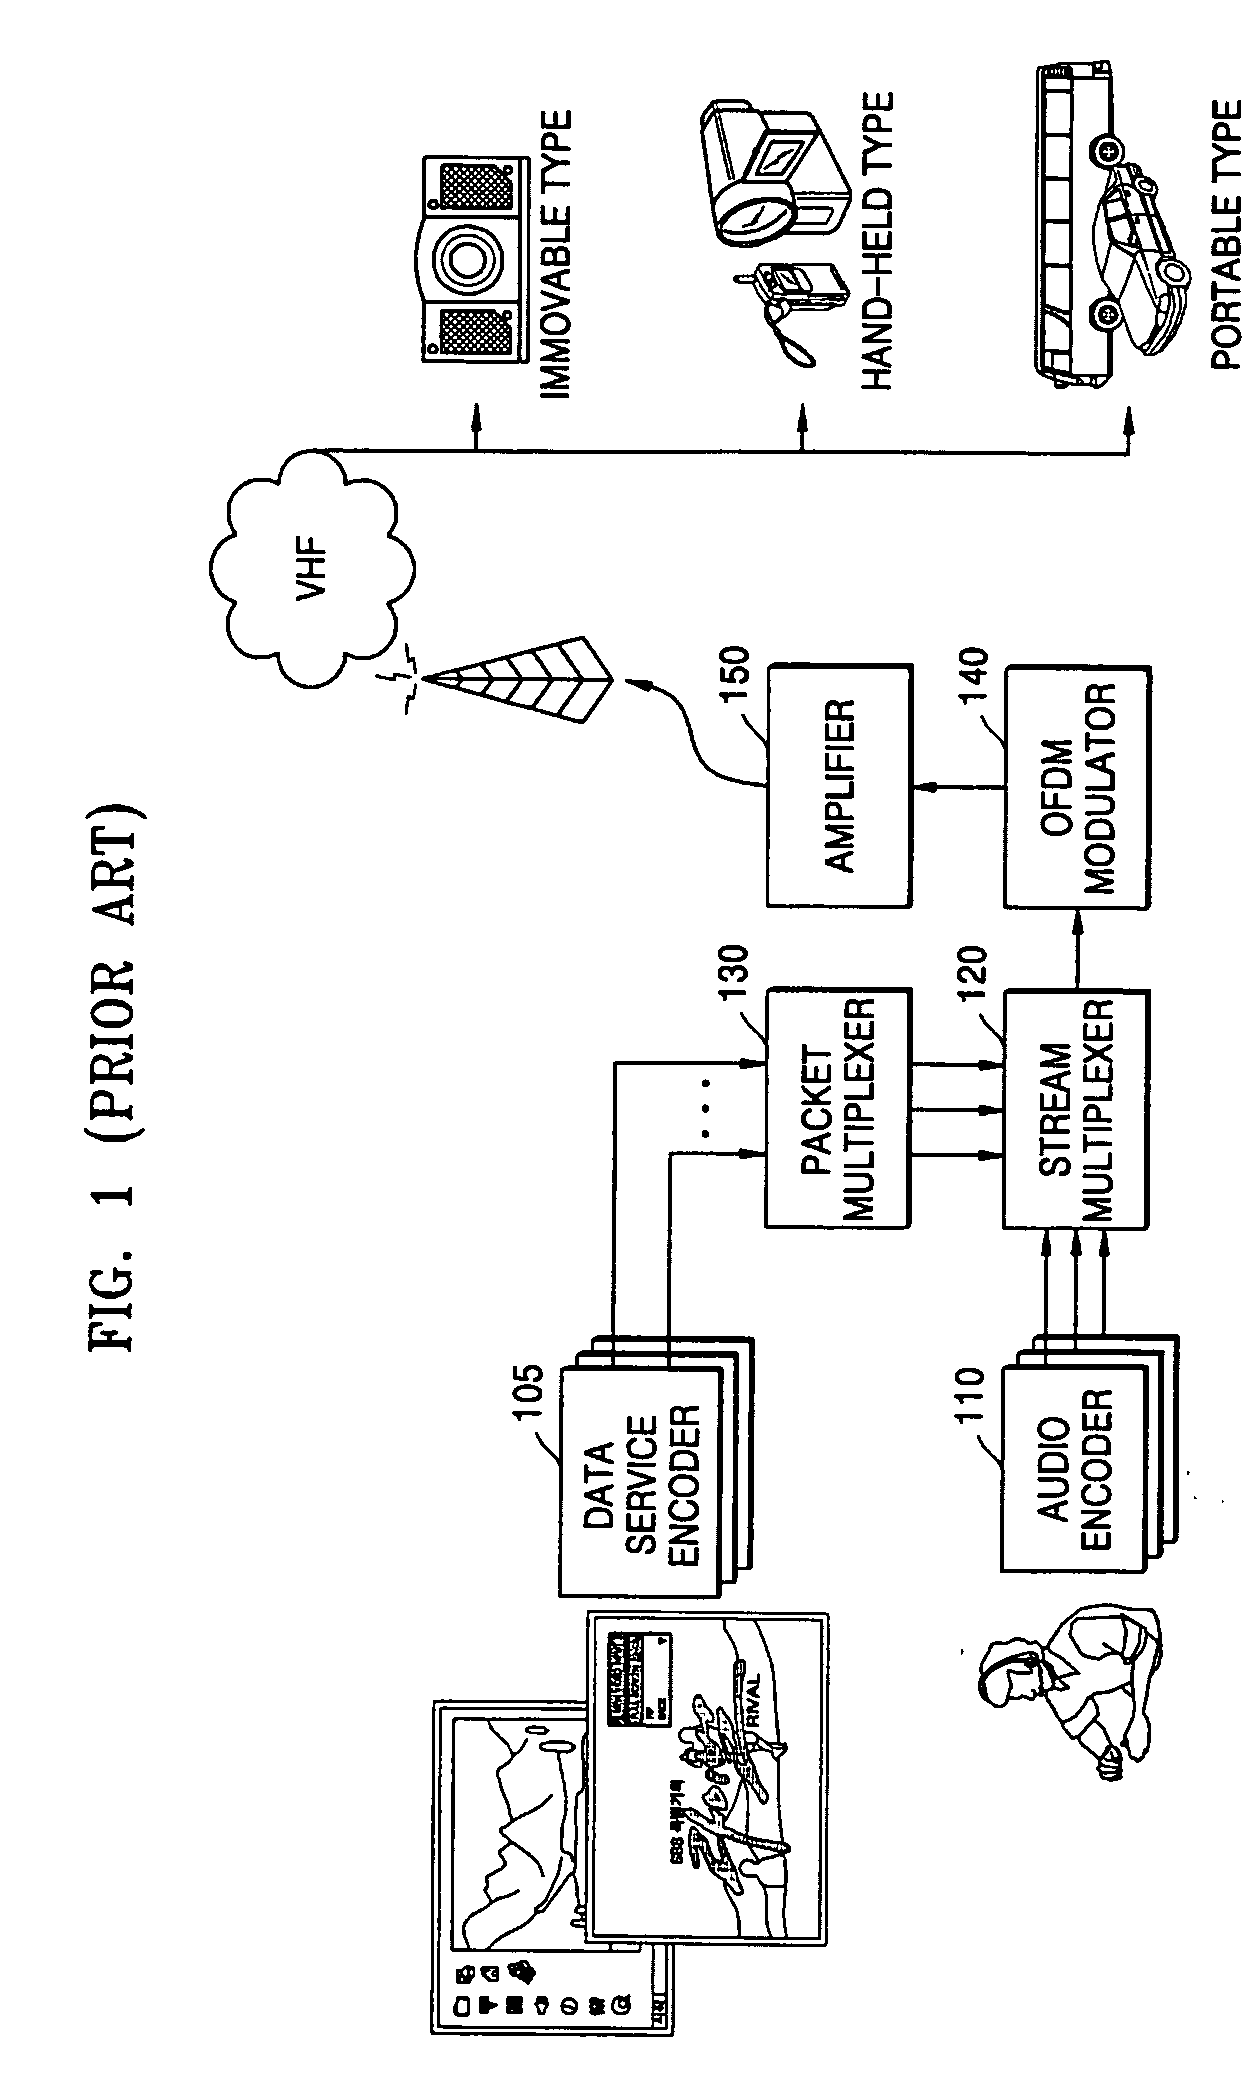 Service display control method, apparatus, and medium using fast information channel in DAB receiver